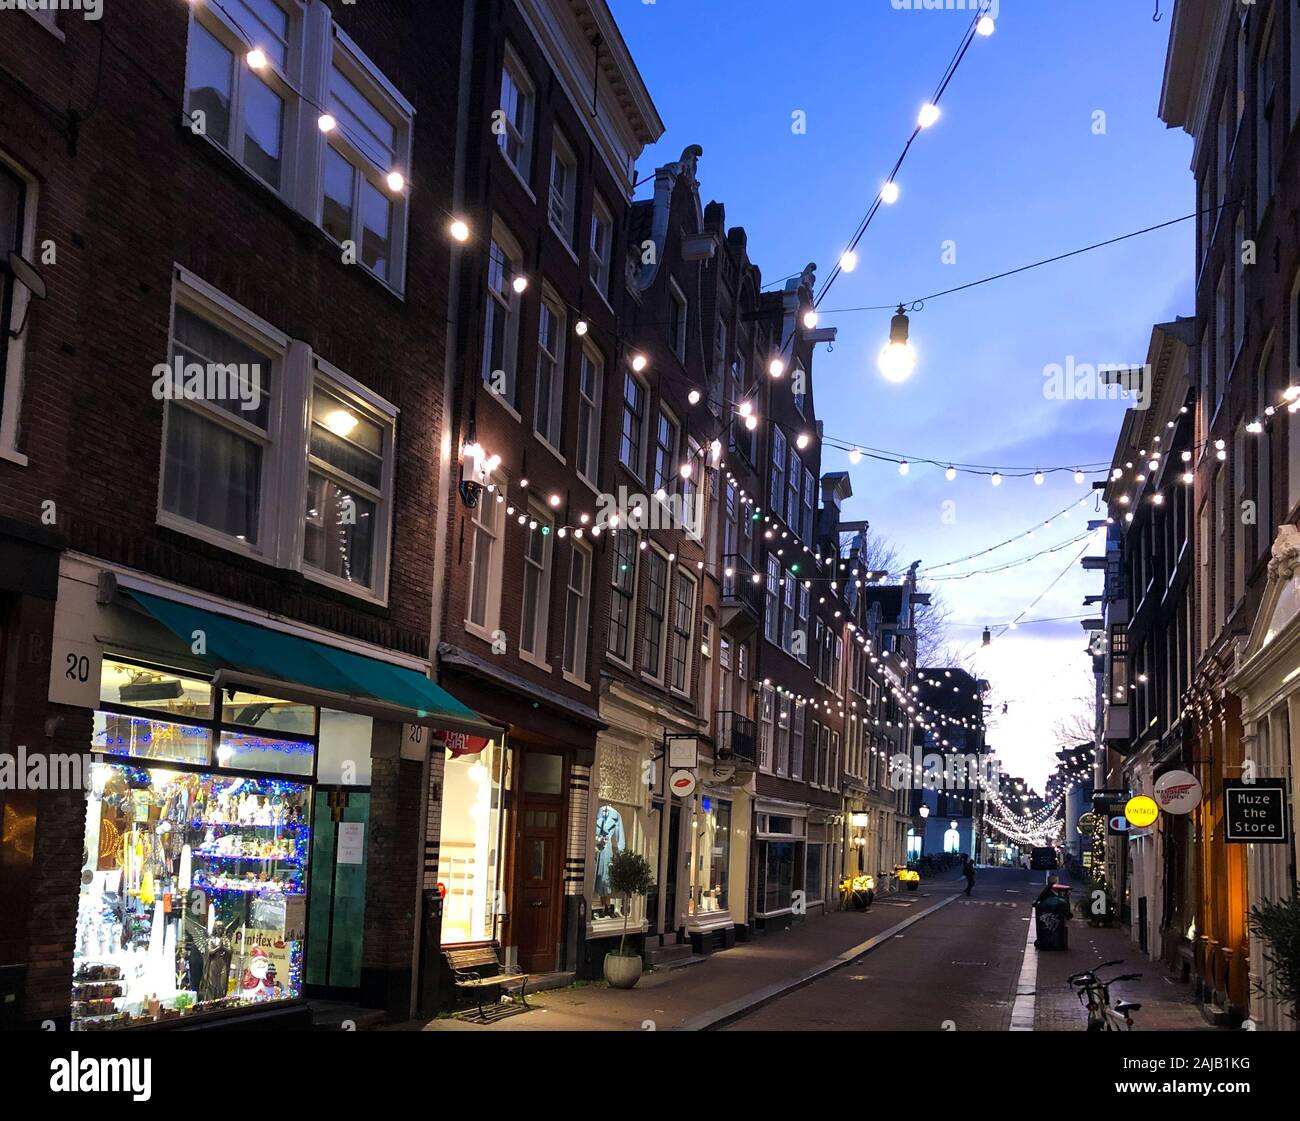 Shops on Ree Straat in 'De 9 Straatjes' (The Nine Streets) district in Amsterdam's city centre, a popular and touristic shopping area. Stock Photo